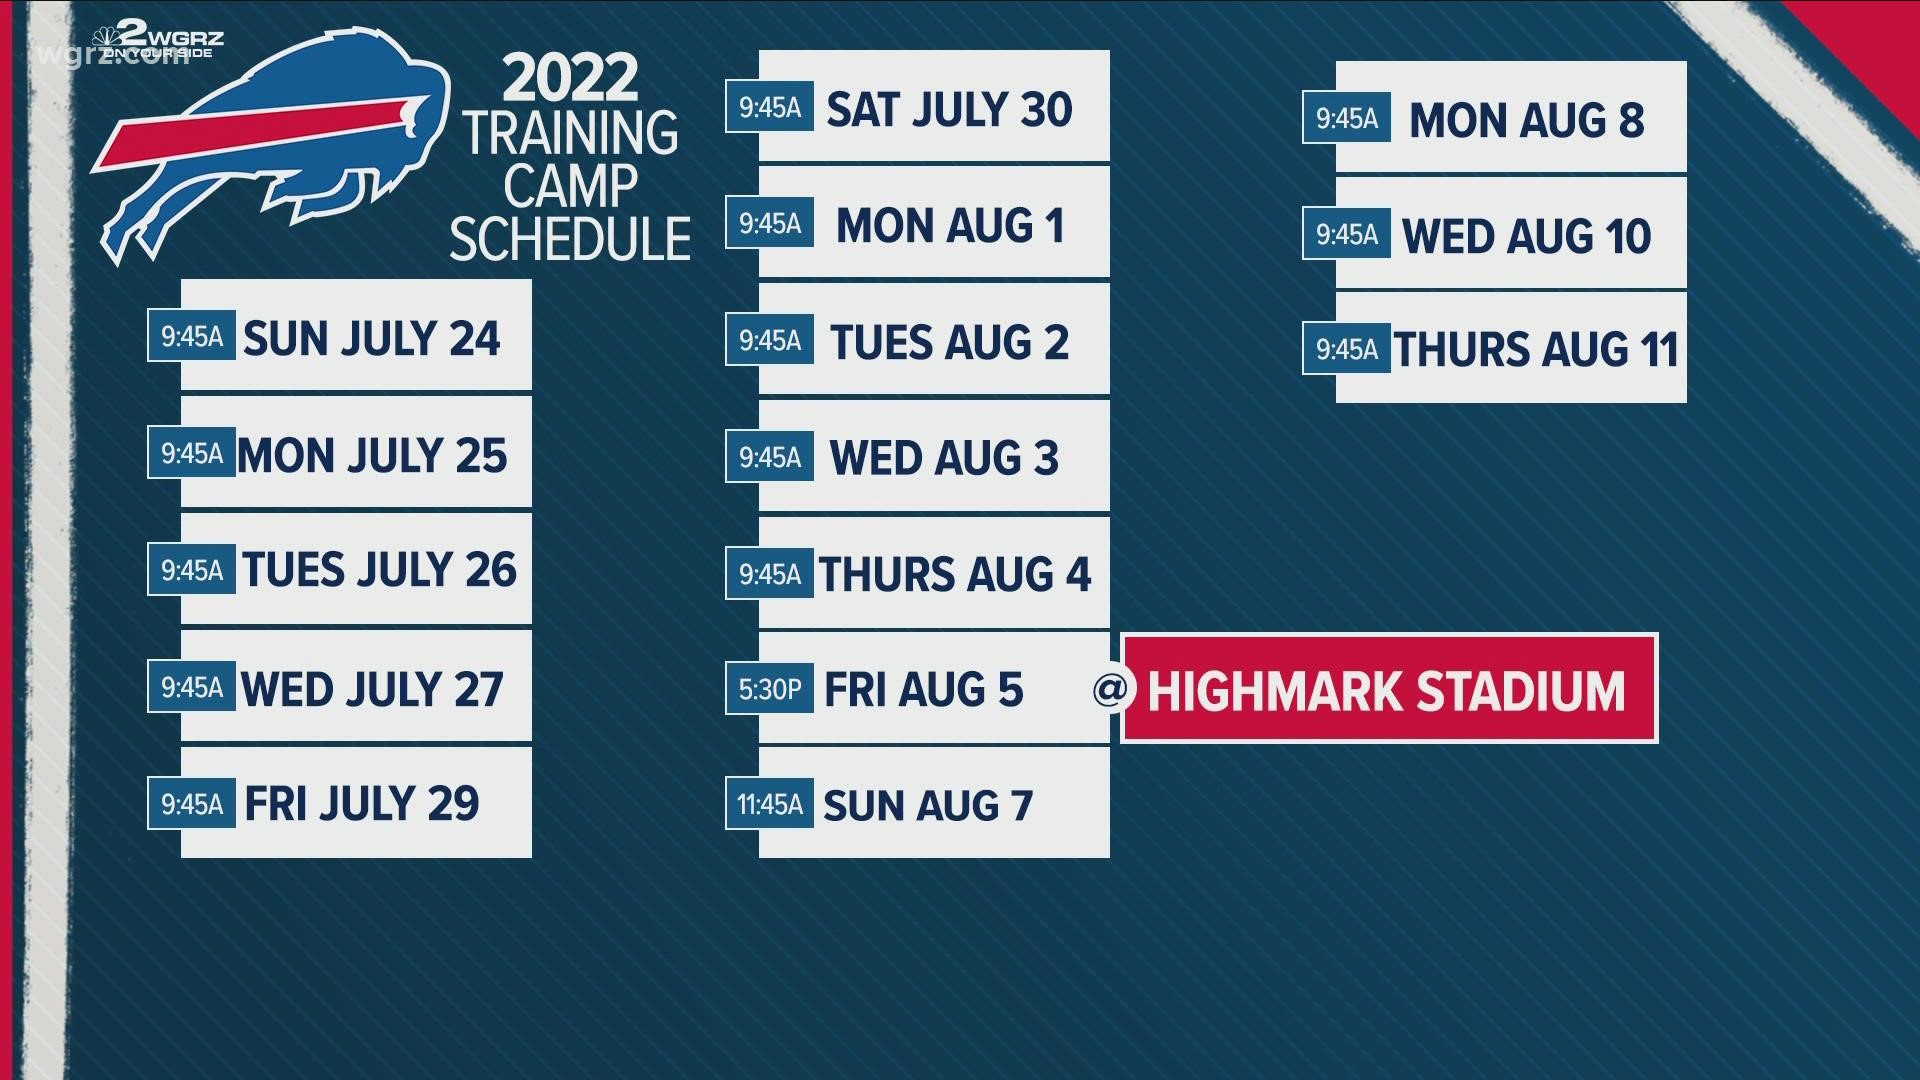 The Highmark practice will require separate tickets- those details haven't been announced yet.